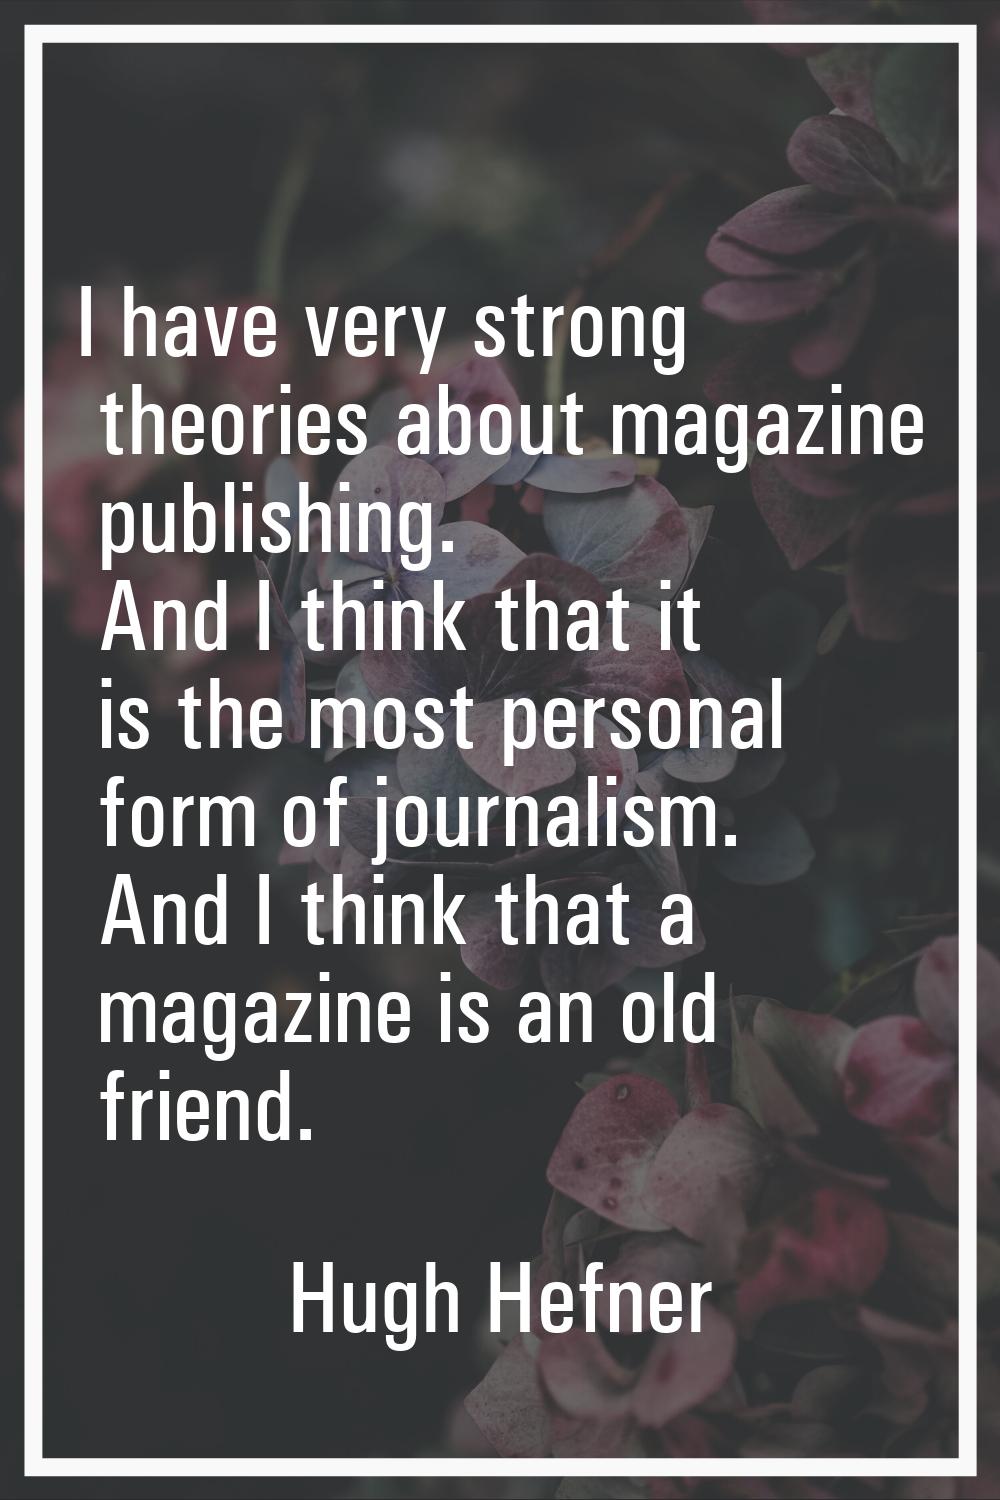 I have very strong theories about magazine publishing. And I think that it is the most personal for